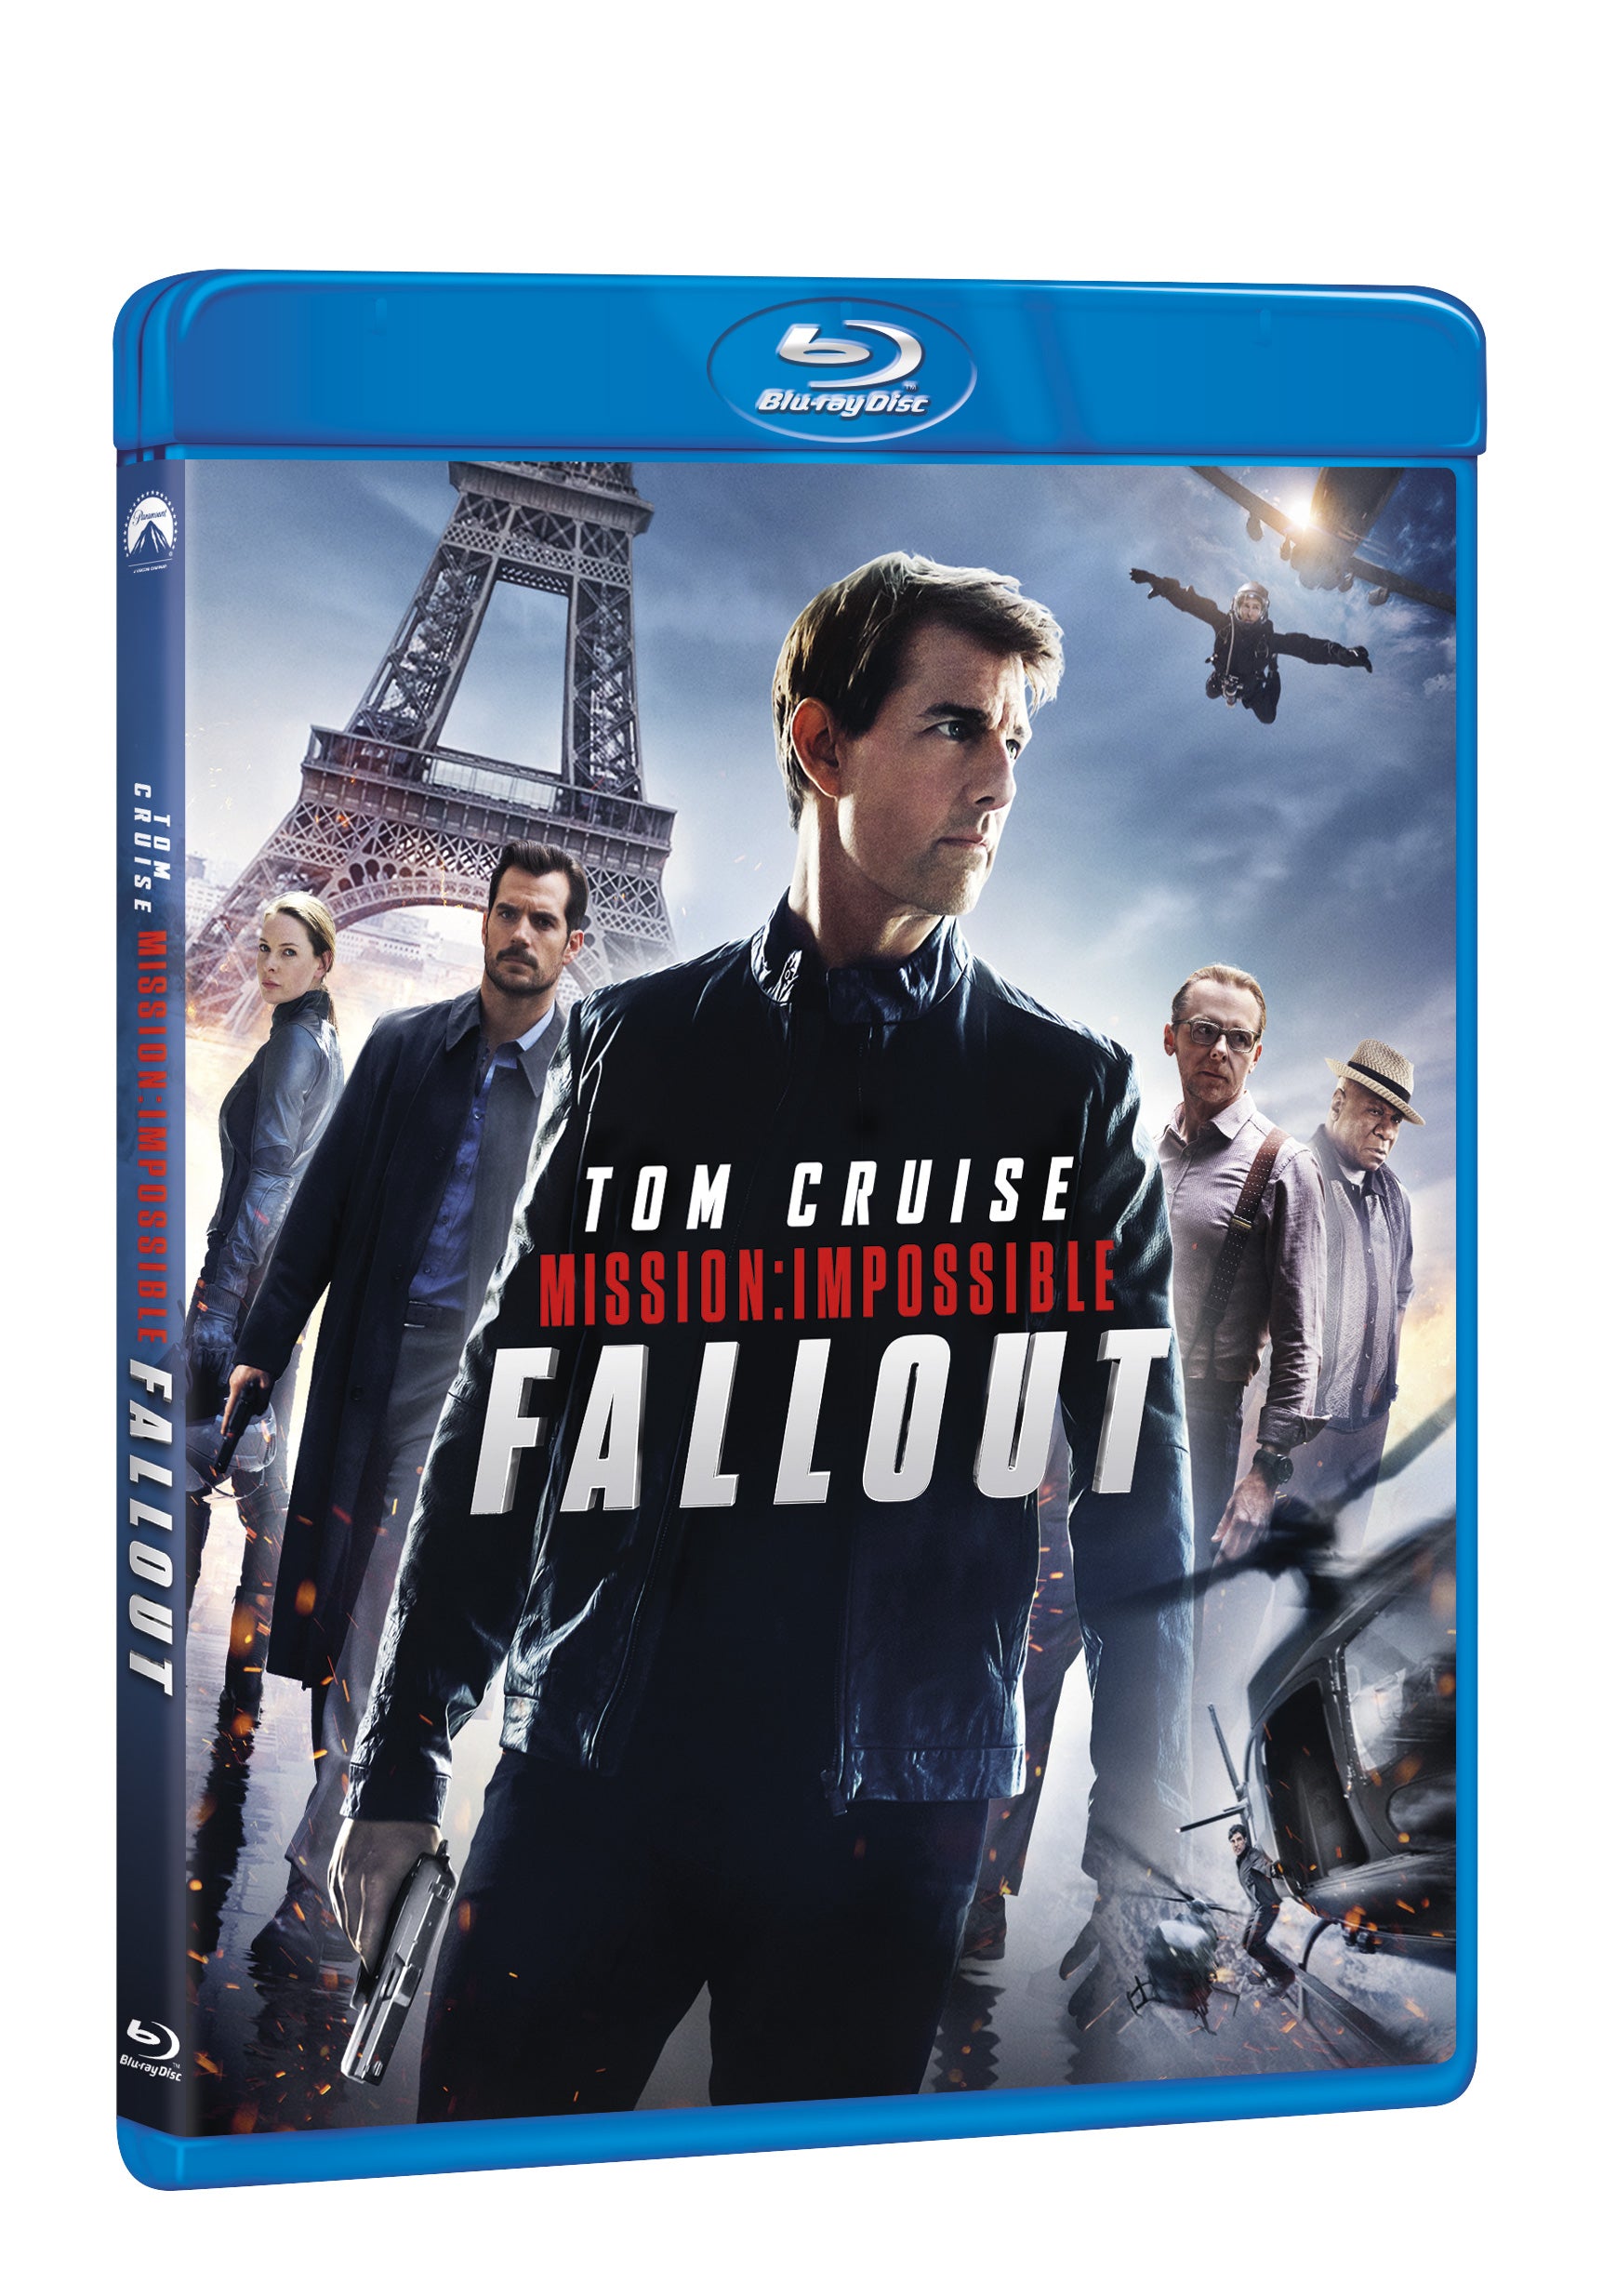 Mission: Impossible - Fallout BD / Mission: Impossible - Fallout - Czech version